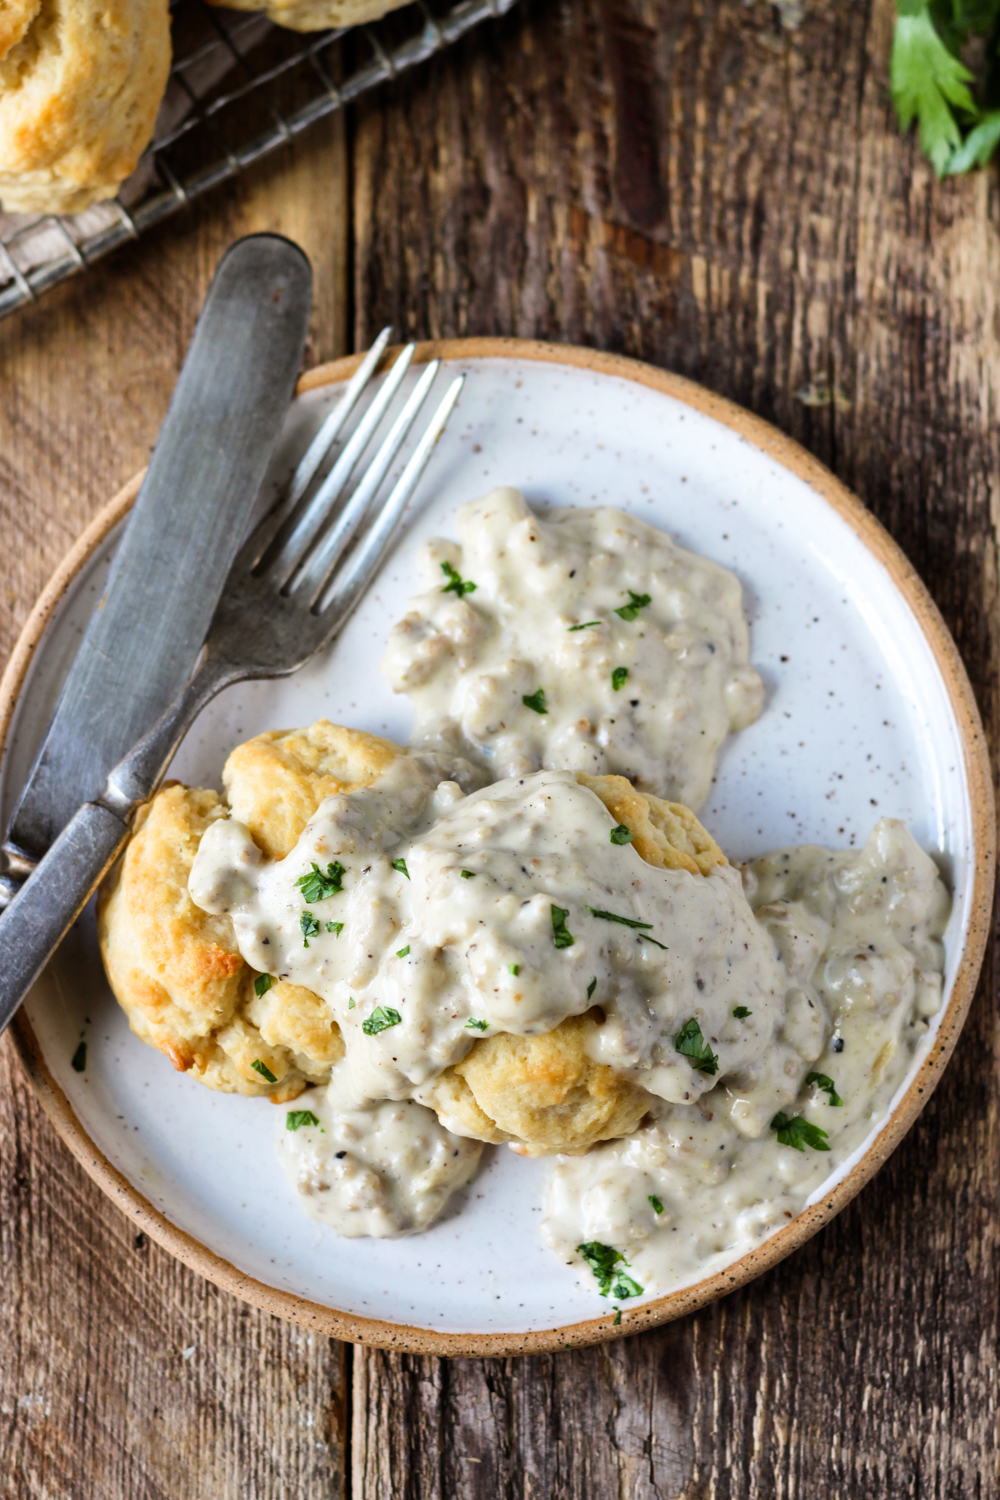 Homemade drop biscuits smothered in sausage gravy